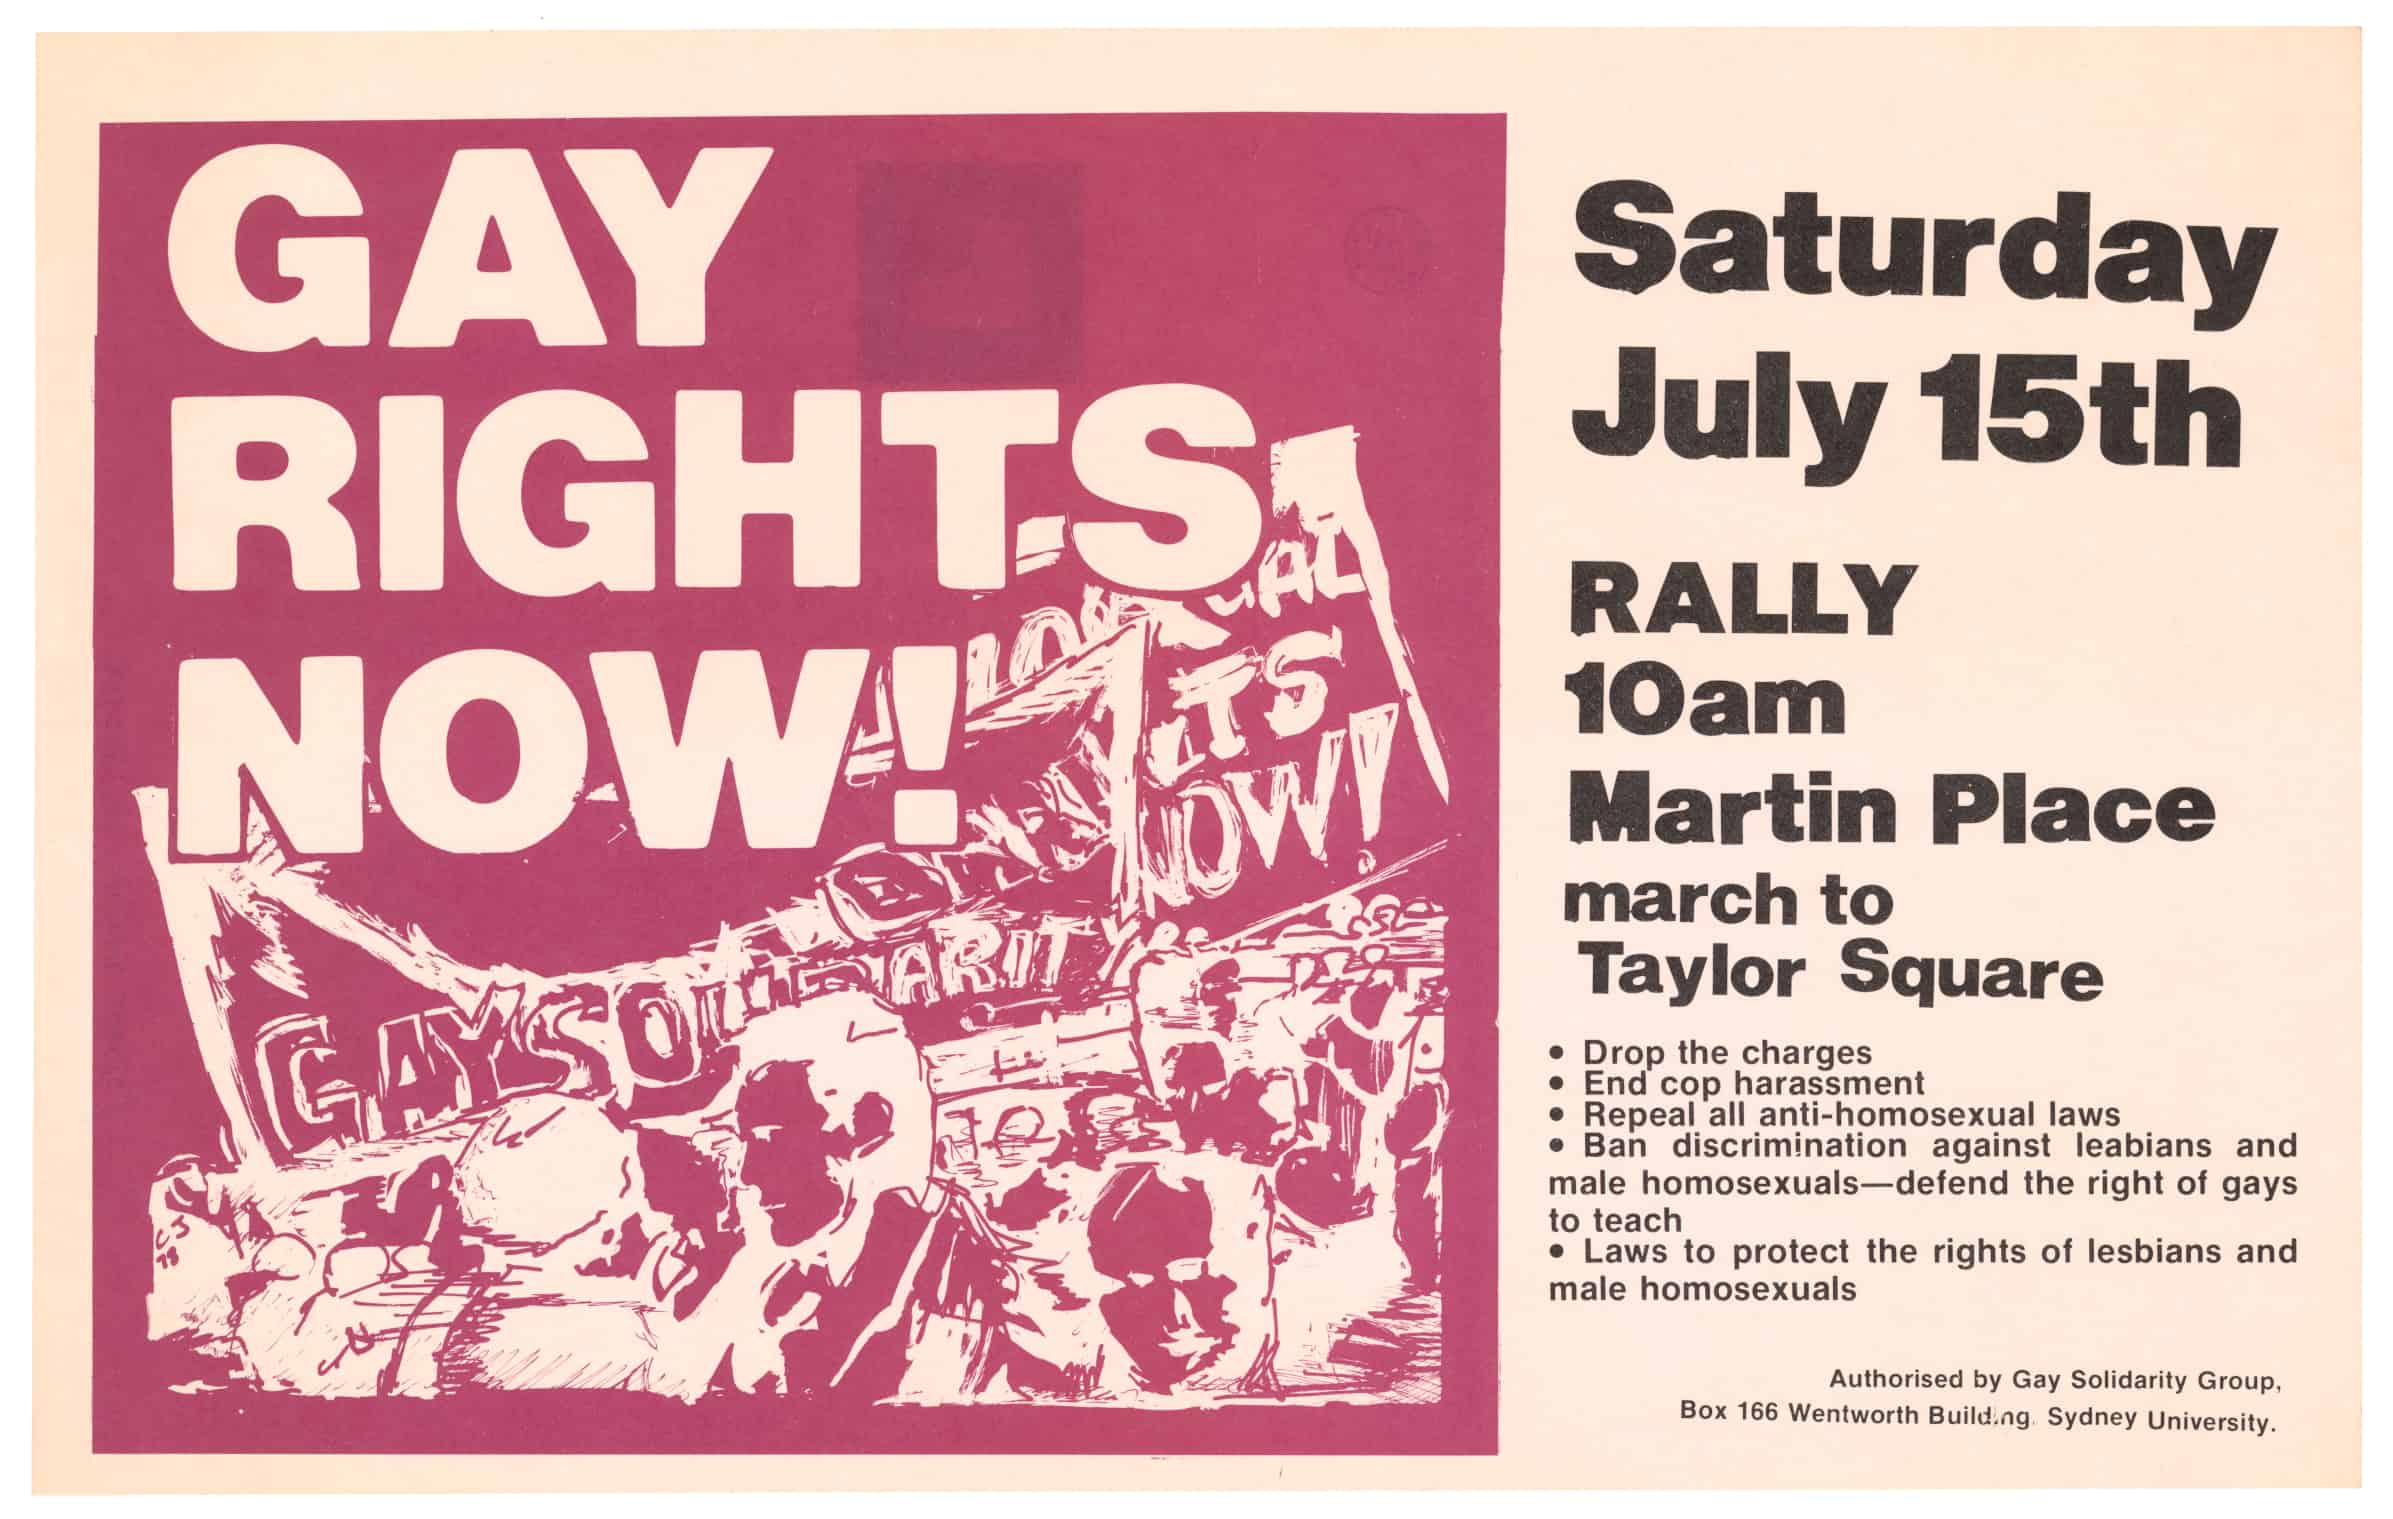 Flyer advertising rally for Saturday July 15th Rally 10 am Martin Place. Title reads Gay Rights Now! Overlaying image of people protesting with banners.